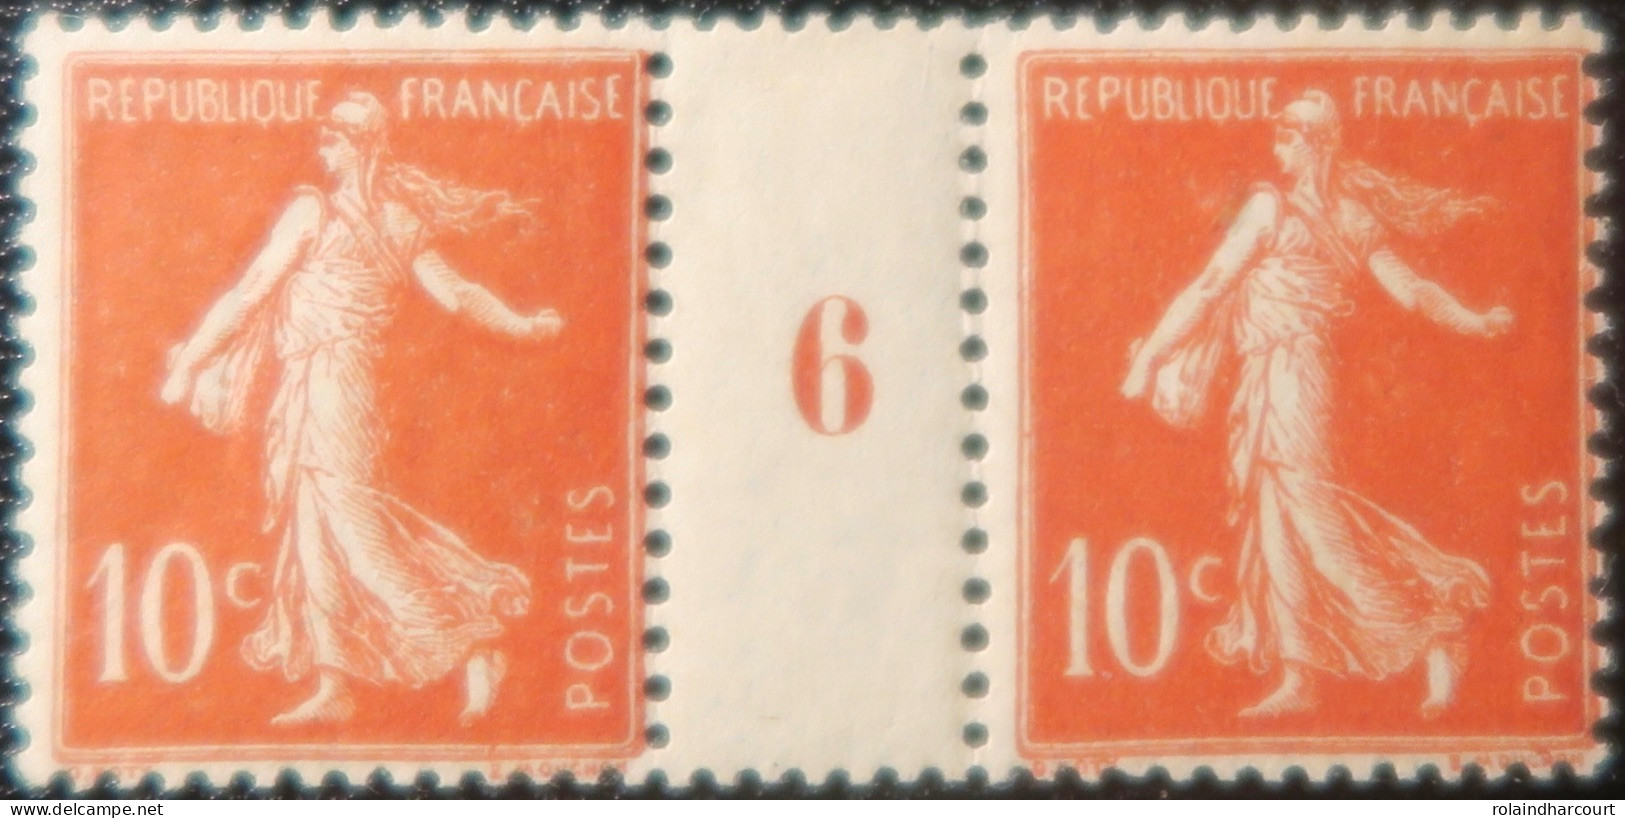 LP2943/78 - FRANCE - 1906 - TYPE SEMEUSE CAMEE - N°135 (millésime 6) TIMBRES NEUFS**(1t)/*(1t) - Millesimes